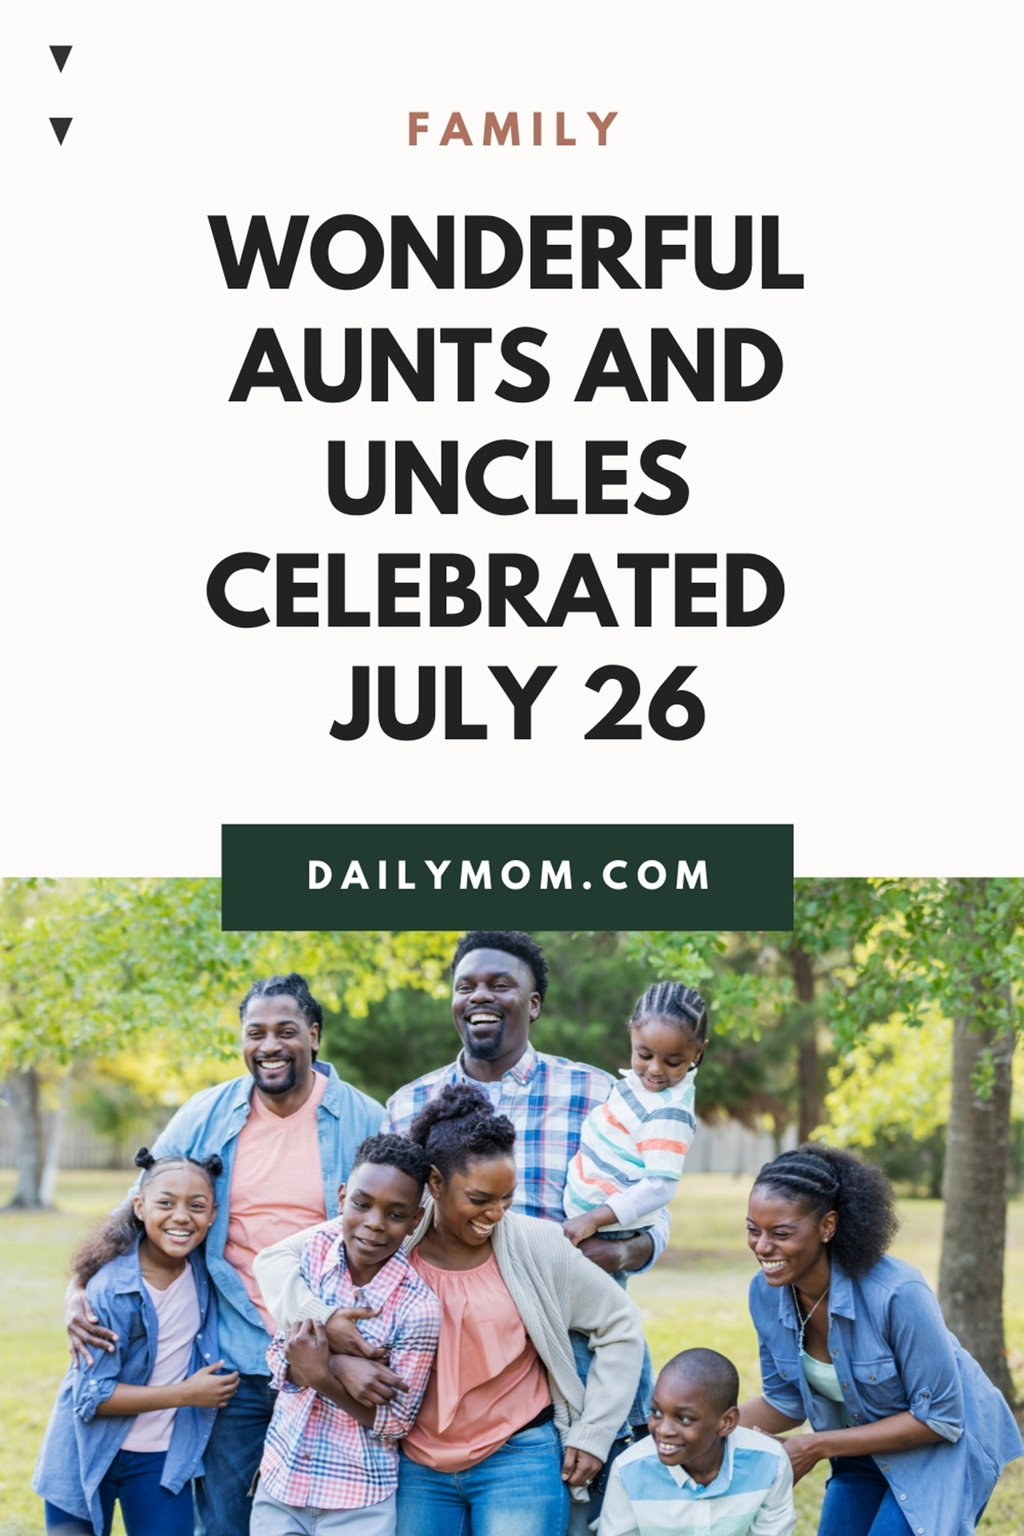 National Aunts & Uncles Day: Celebrate Those Awesome Family Members On July 26